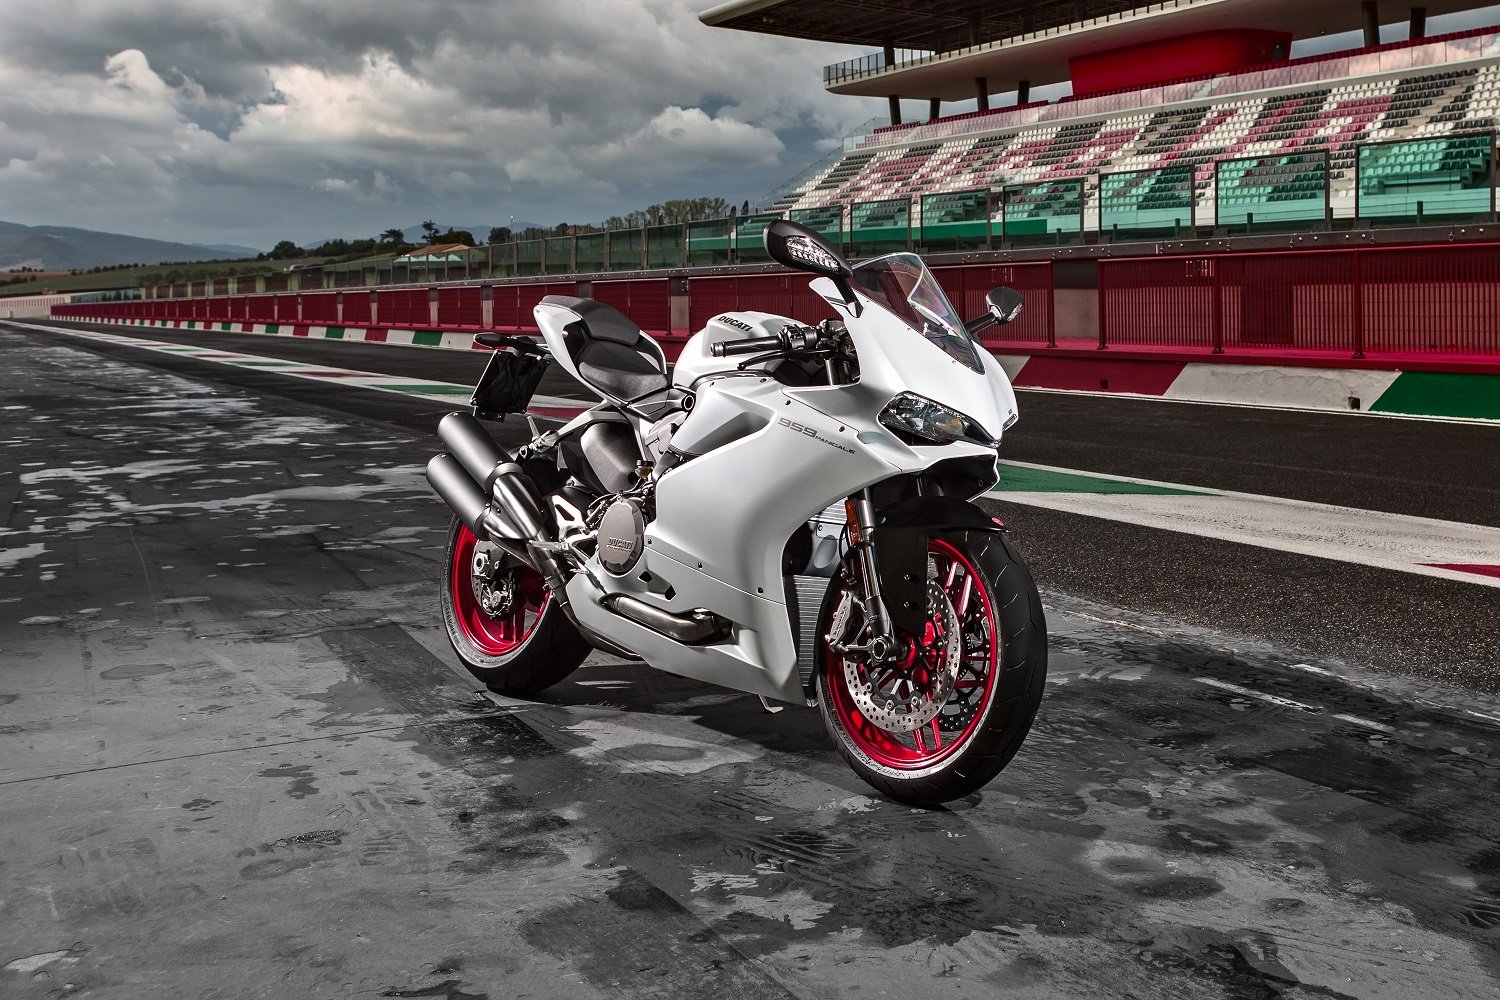 ducati, 959, Panigale, Motorcycles, 2016 Wallpaper